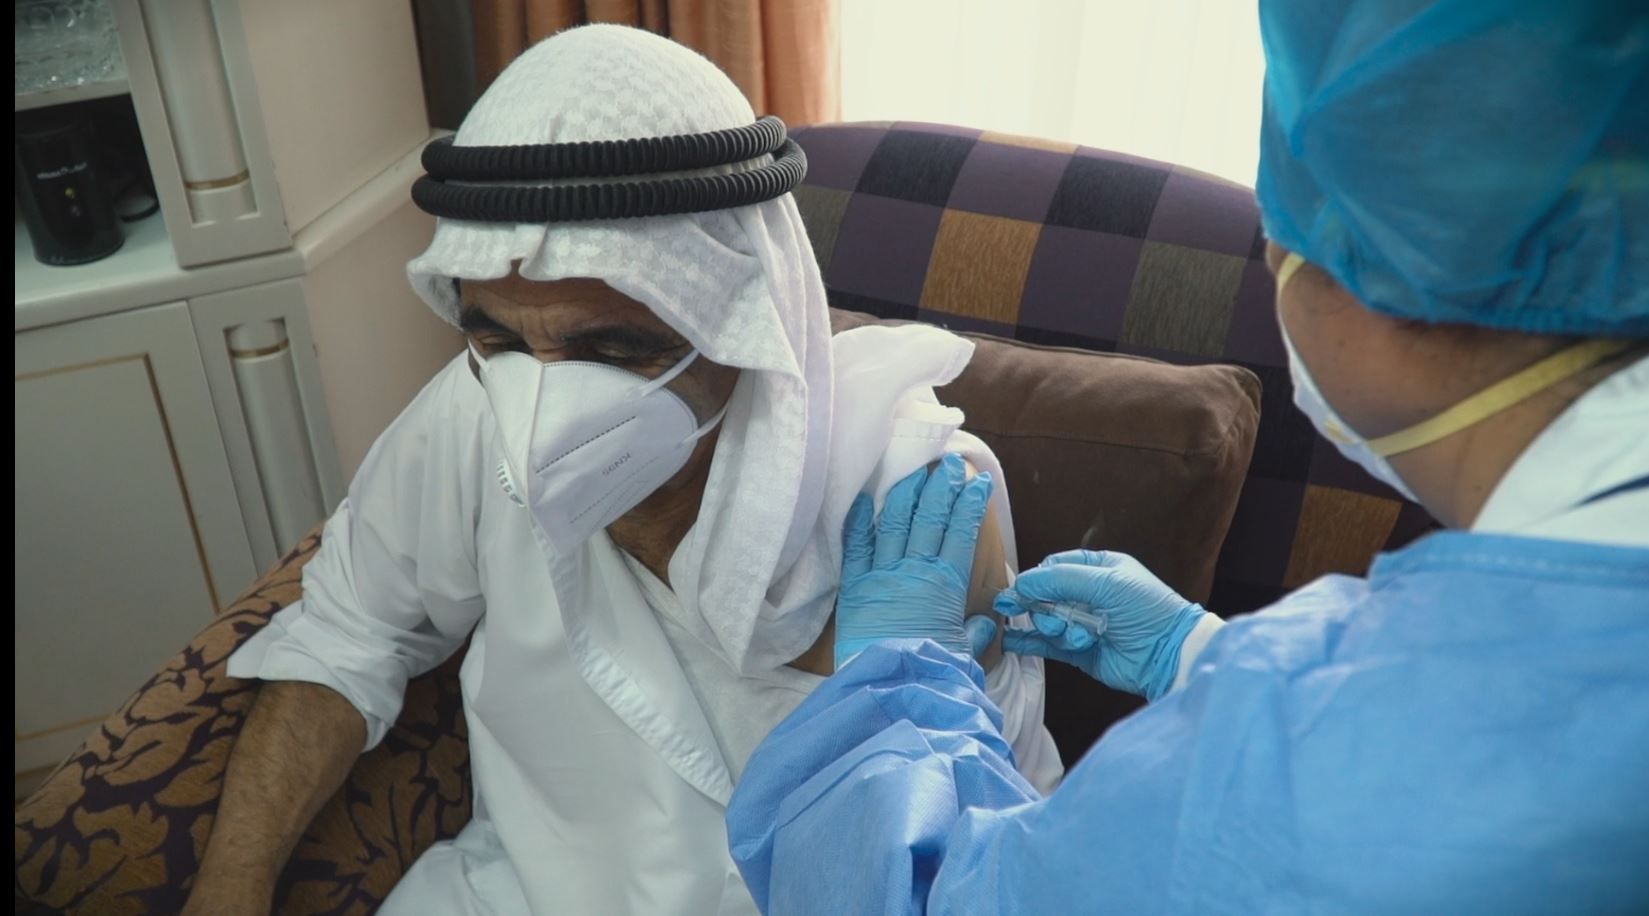 Home vaccination drive for senior citizens launched by Community Development Authority & Dubai Health Authority